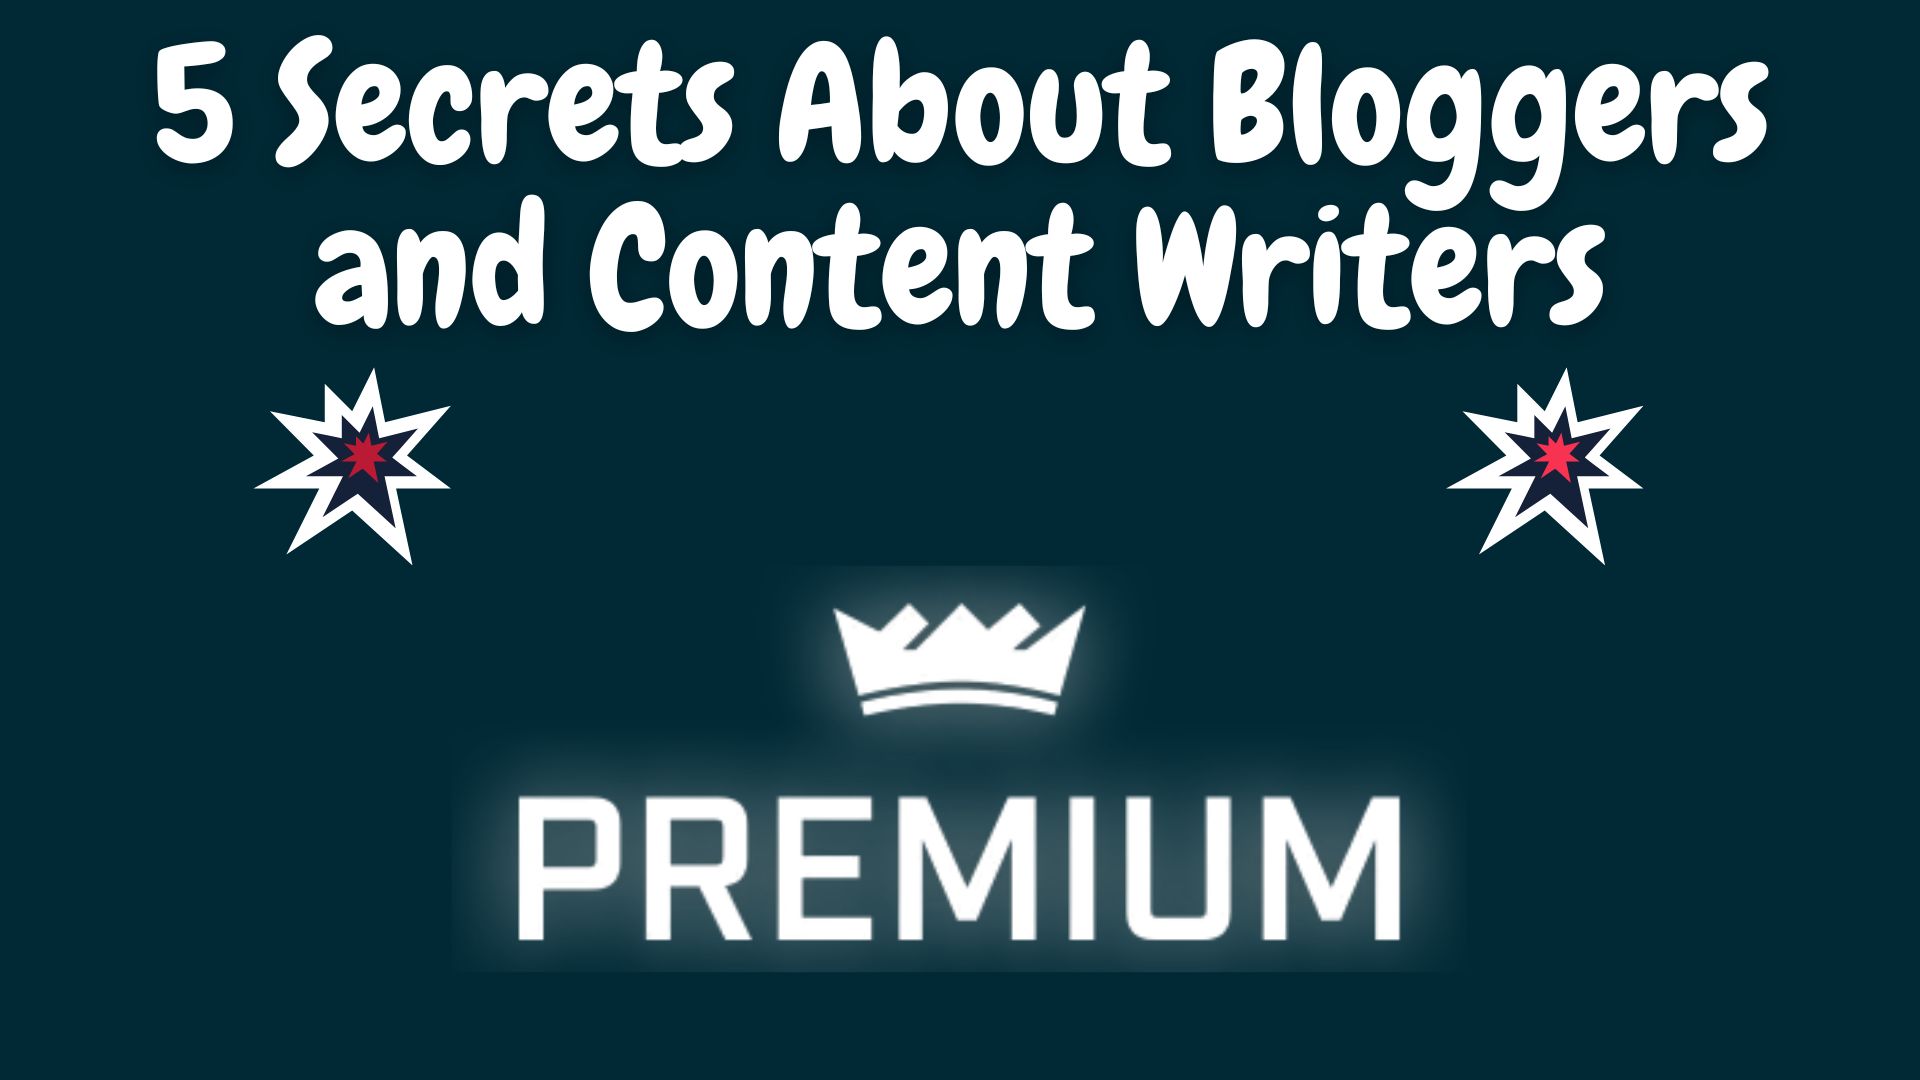 5 secrets about bloggers and content writers